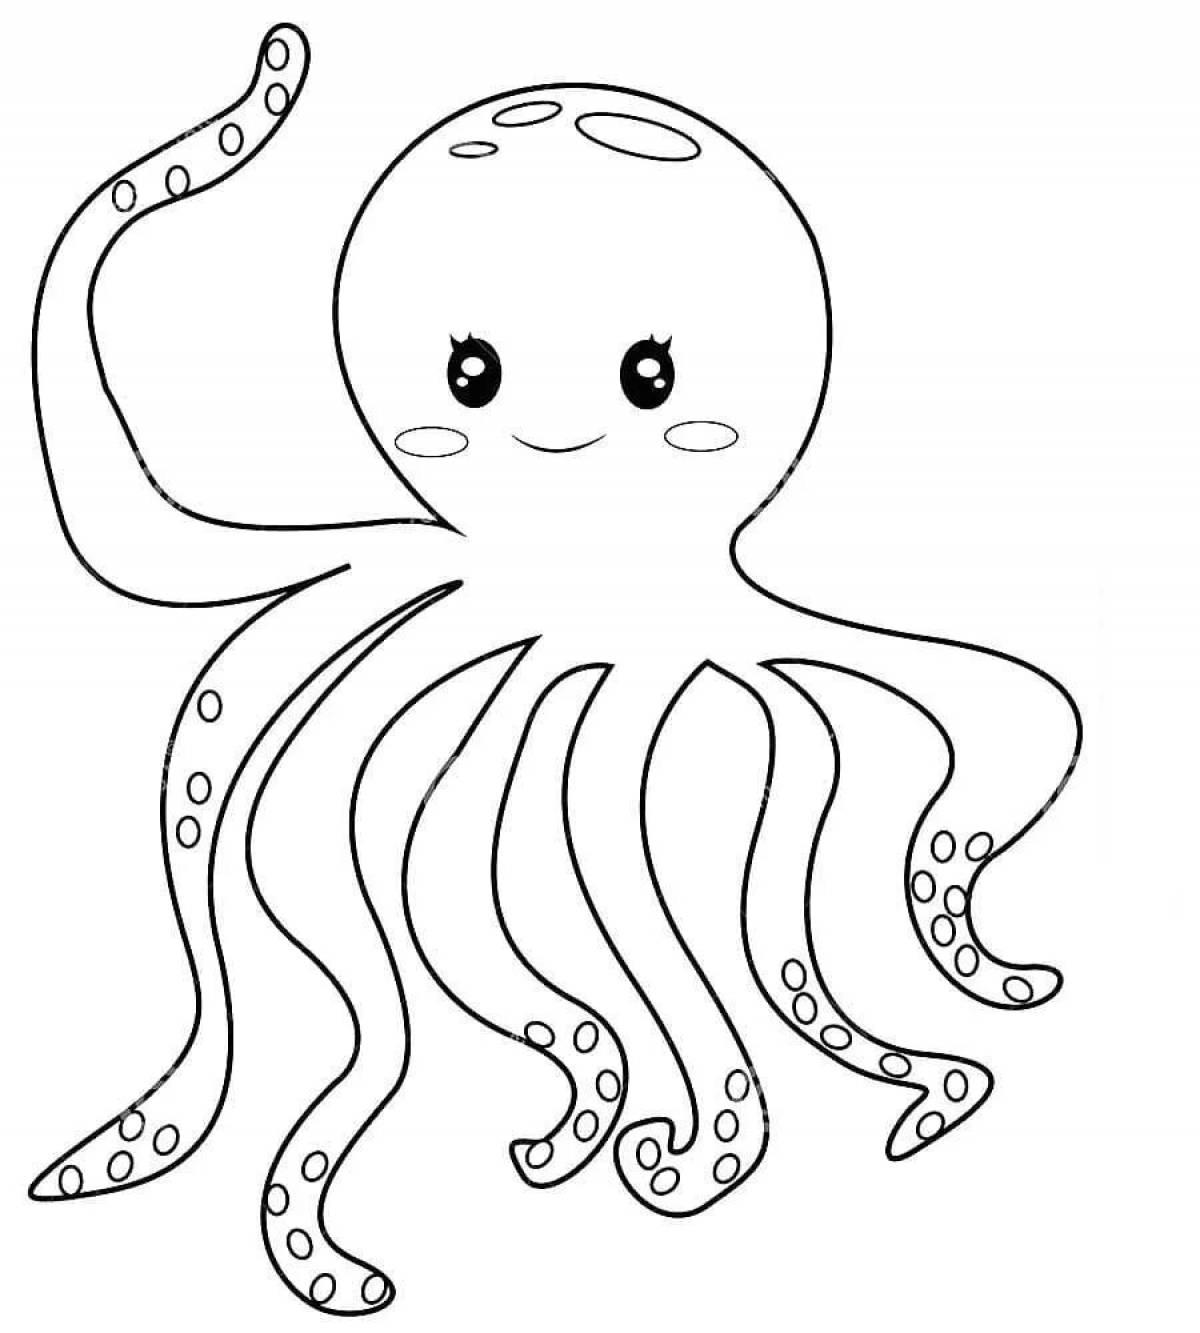 Exquisite octopus coloring book for kids